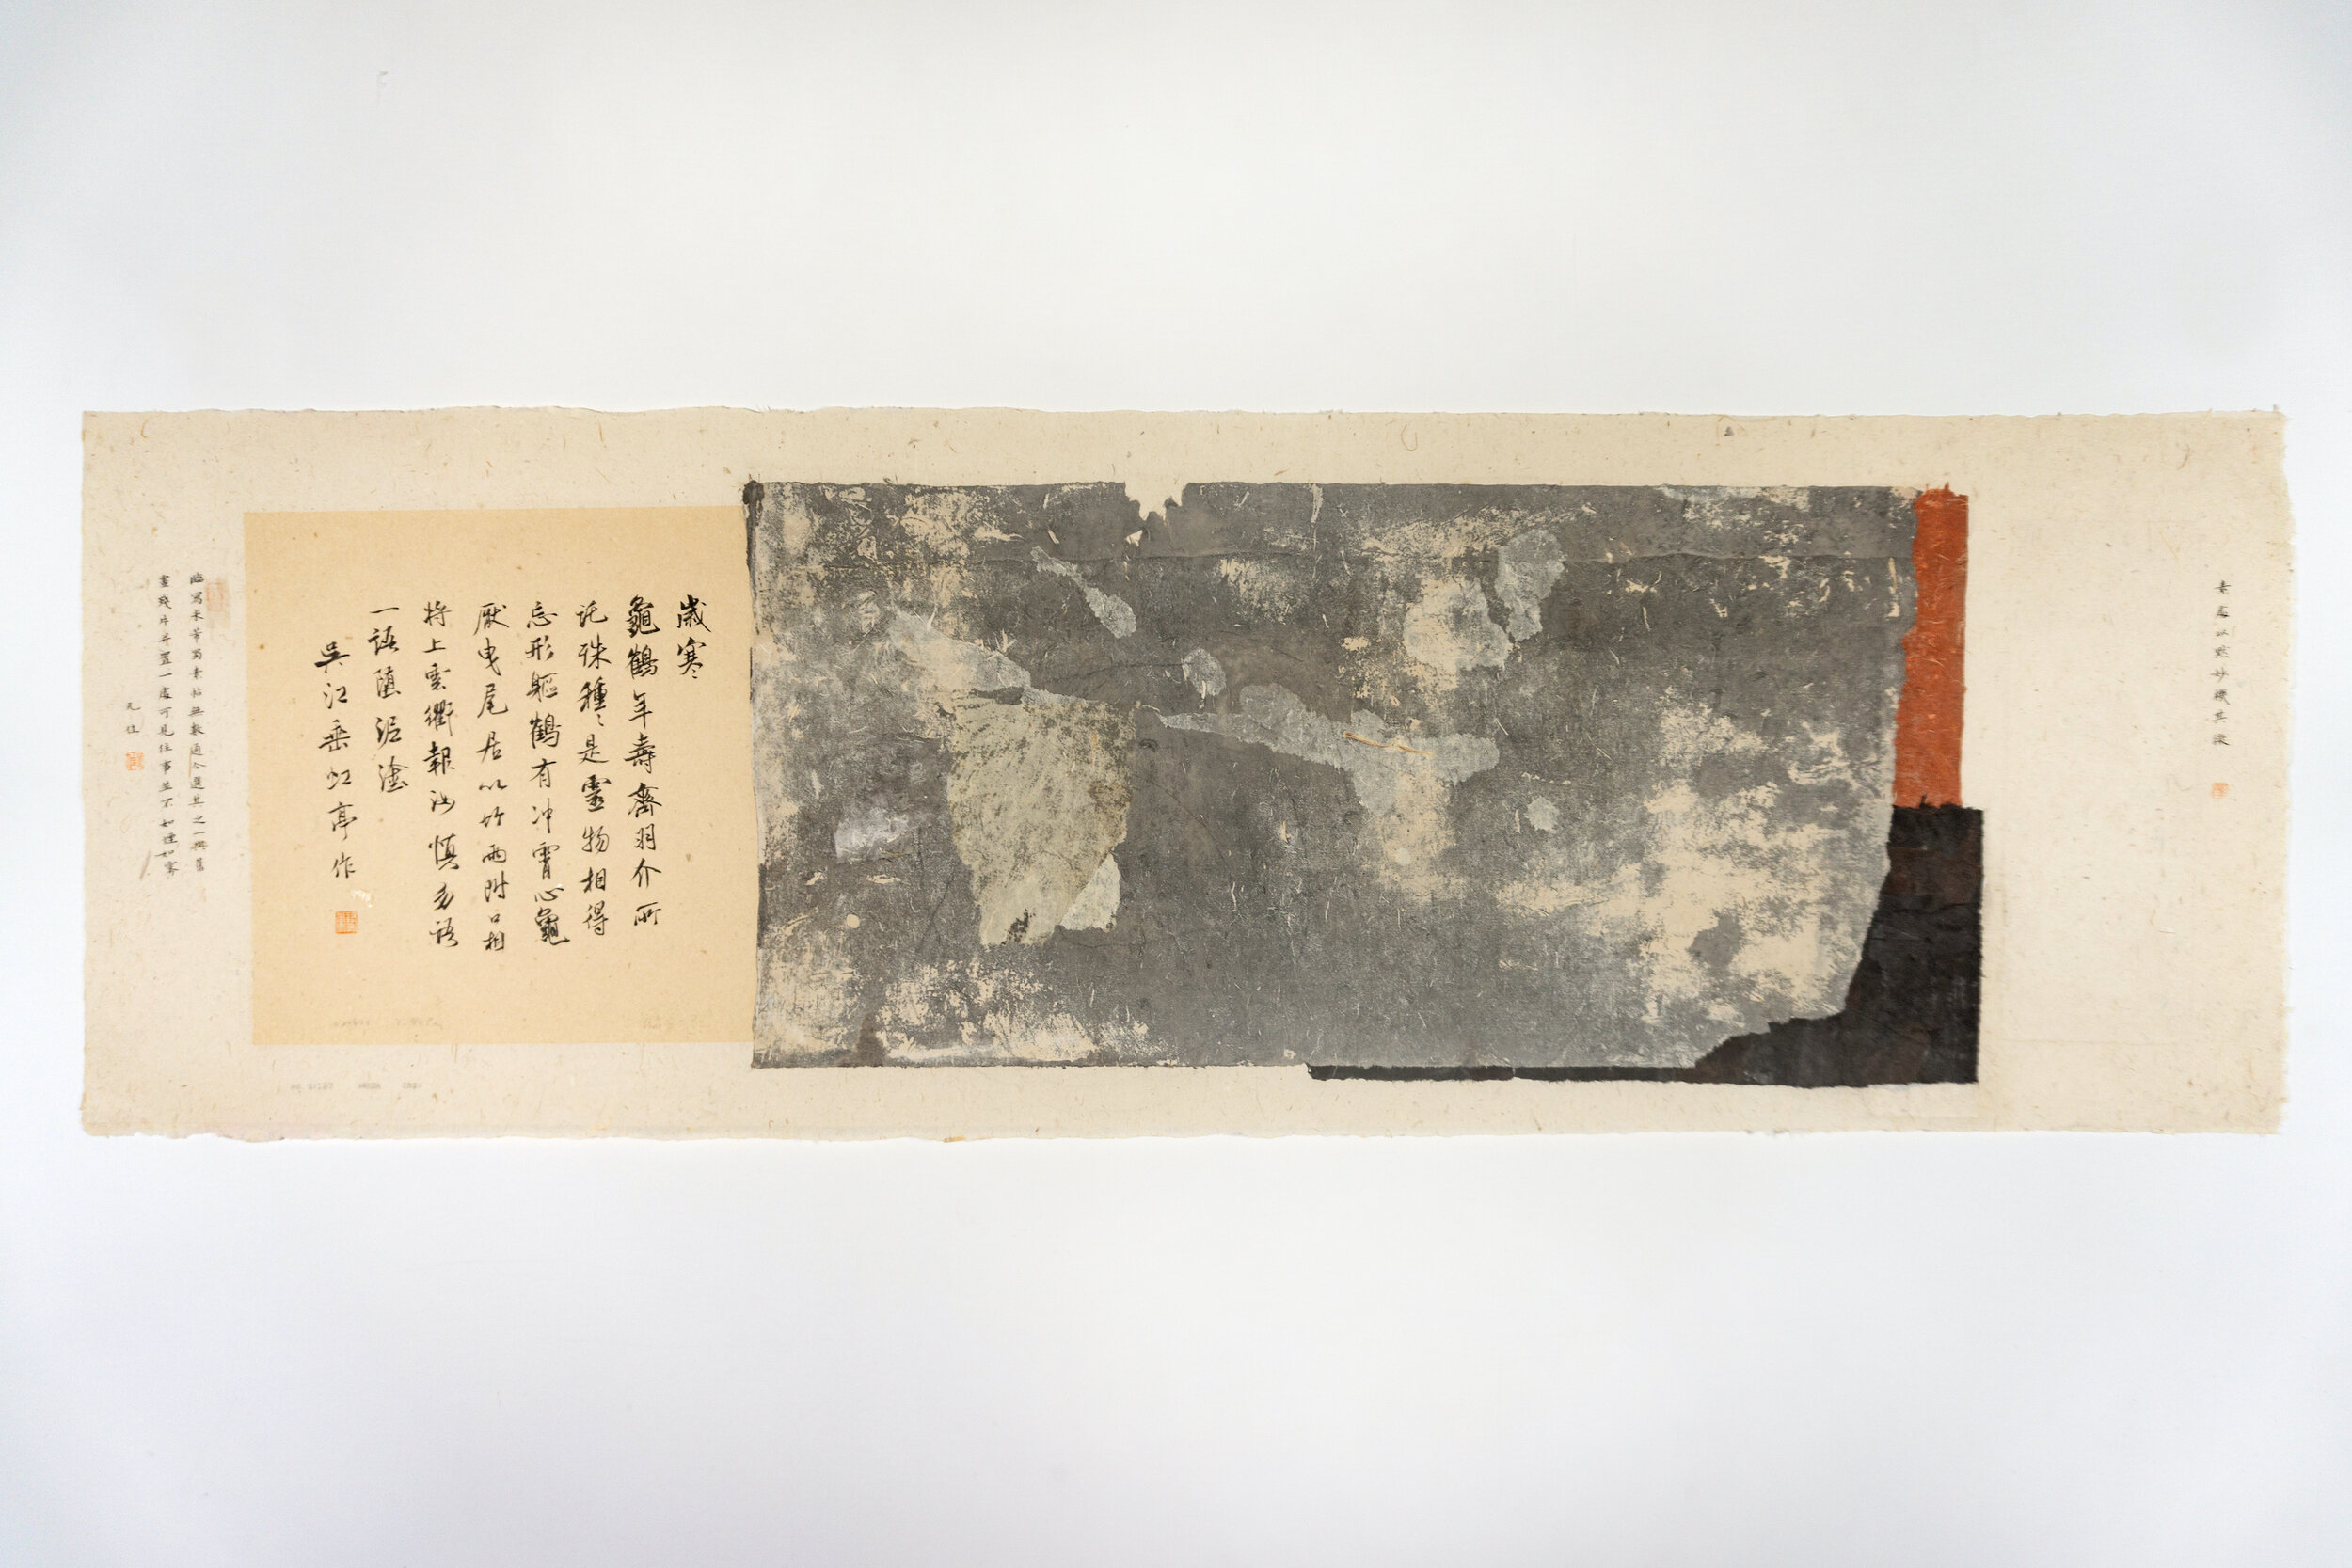  Wei Jia,  No. 21287,  2021. Gouache, ink and Xuan paper, collage on paper, 18 1/2 x 57 inches ©Wei Jia, courtesy Fou Gallery 